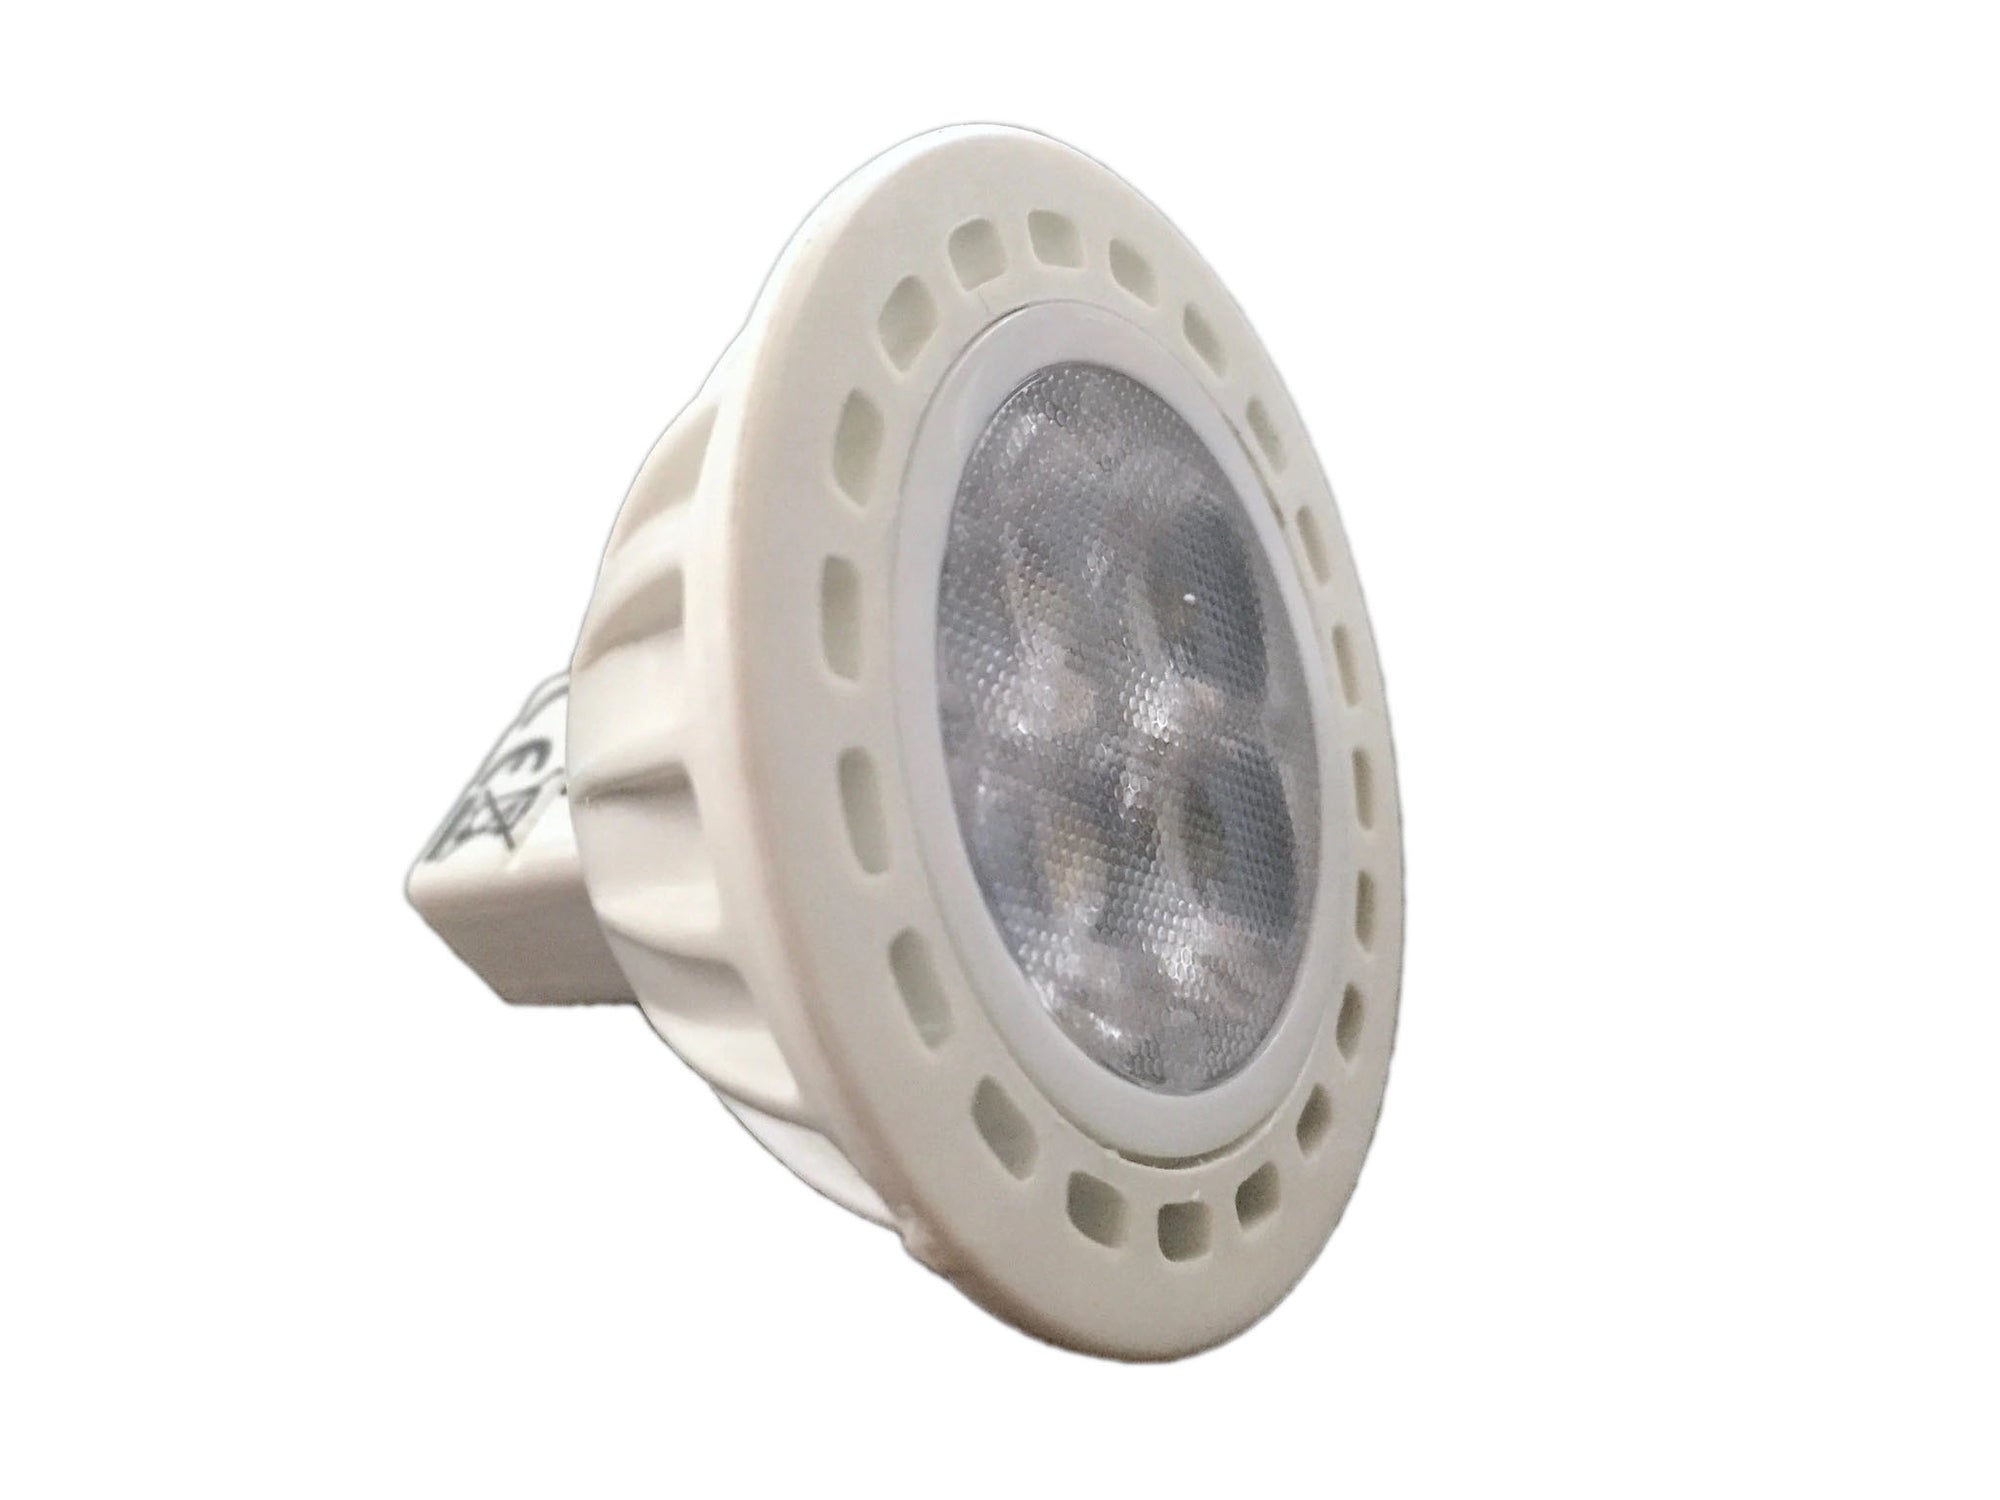 LED Replacement Fountain Light Kit Bulb